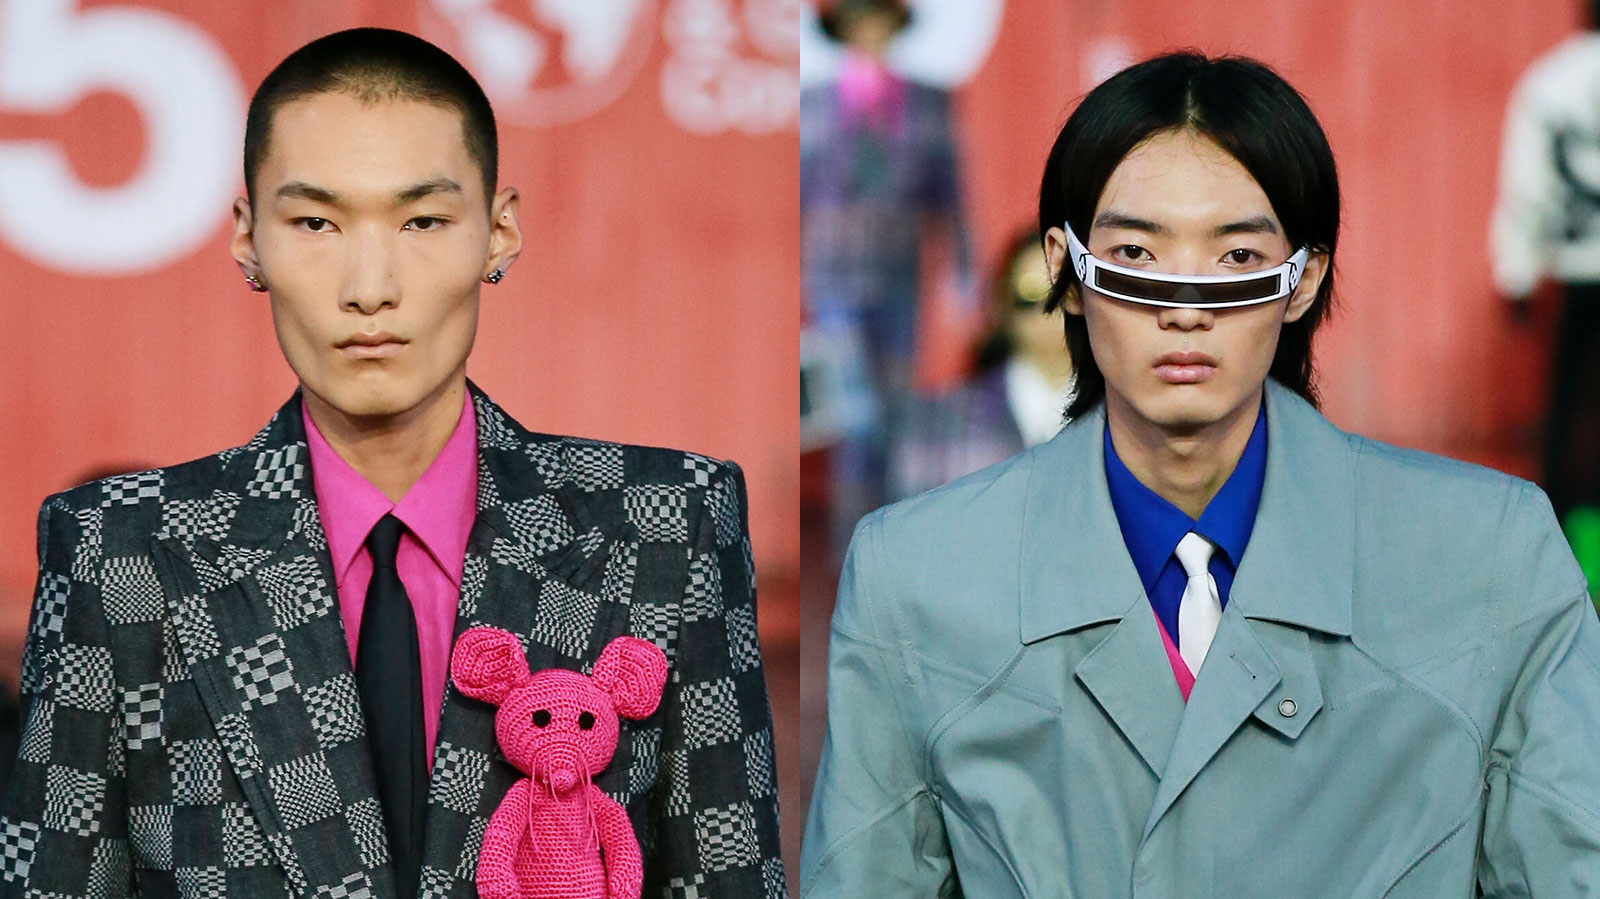 Meet the trans and androgynous models who stole the show at Louis Vuitton  Womenswear  Dazed